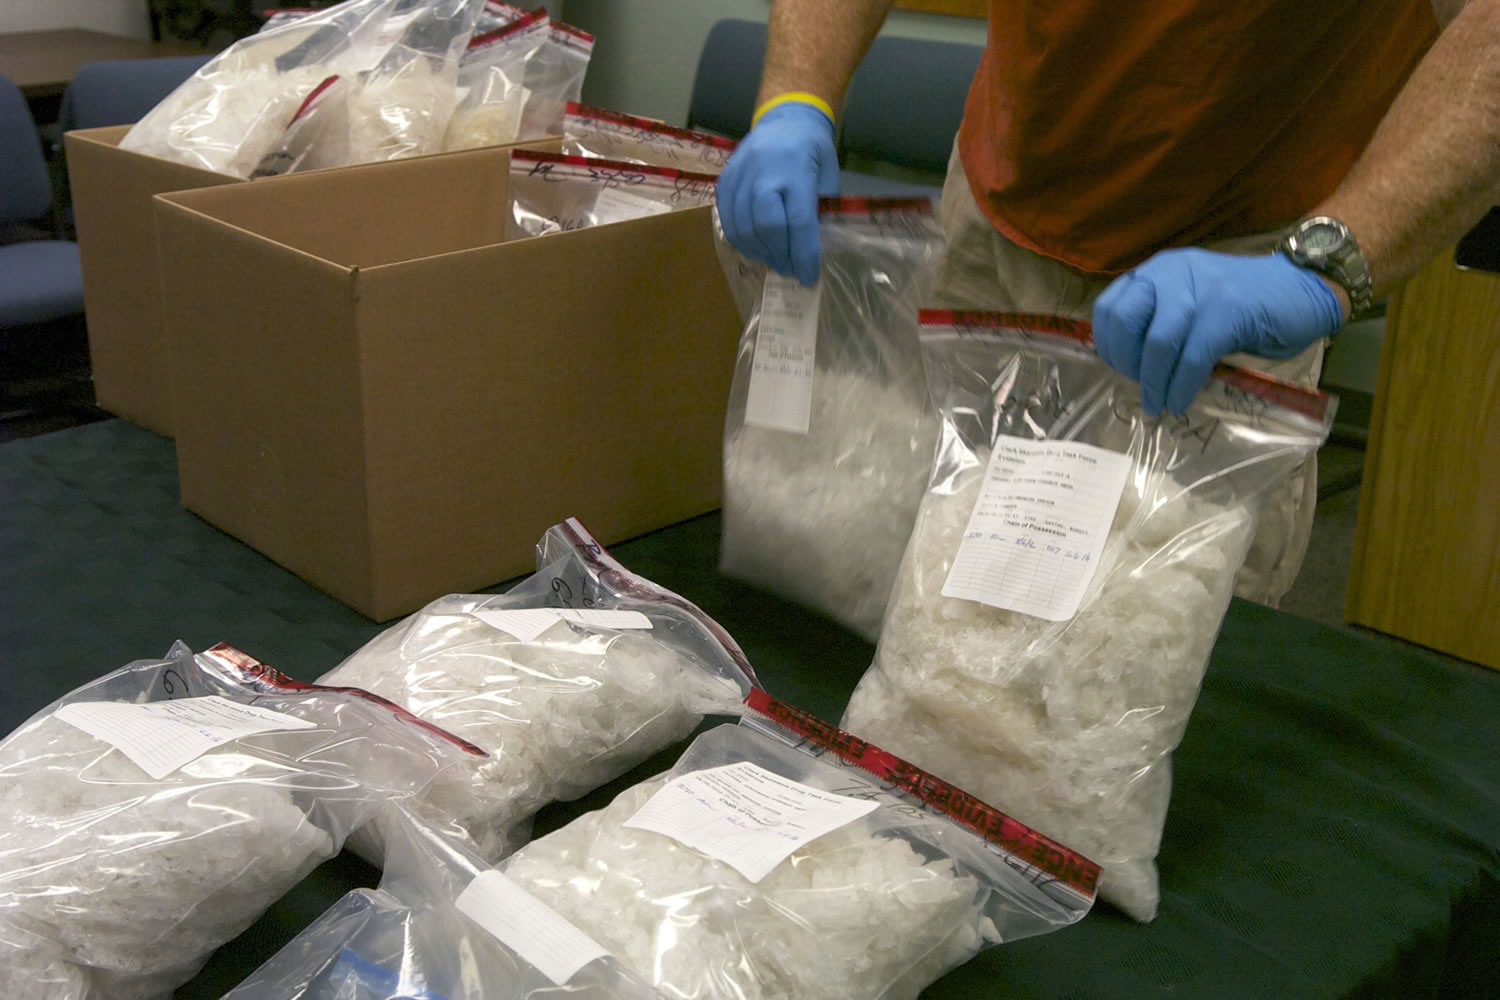 The Clark-Vancouver Regional Drug Task Force seized 74 pounds of crystal meth in a series of raids earlier this week.